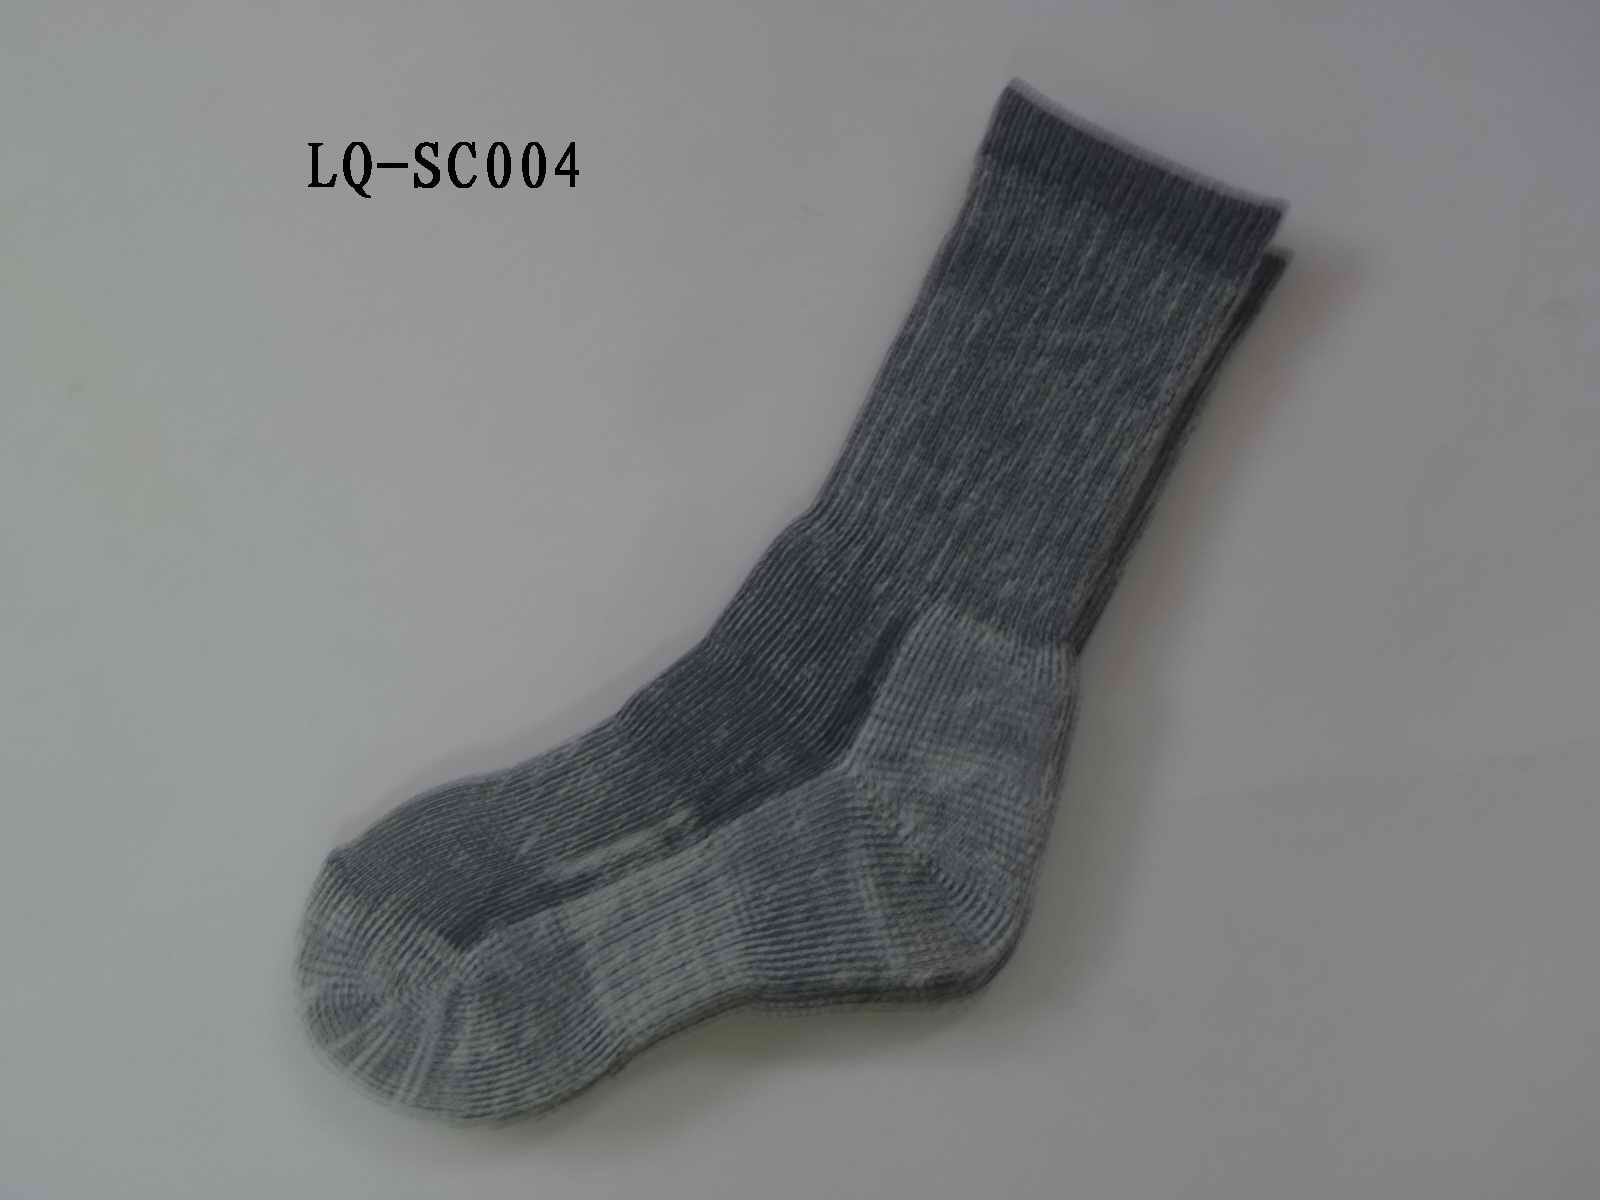 <img src='../manage/Upload/Pic/20123714938885.jpg' width='400' style='border:3px solid #EEEEEE;'><div align=center>Name:OUTDOOR SOCKS,No.:2030283,Price:0 元</div>